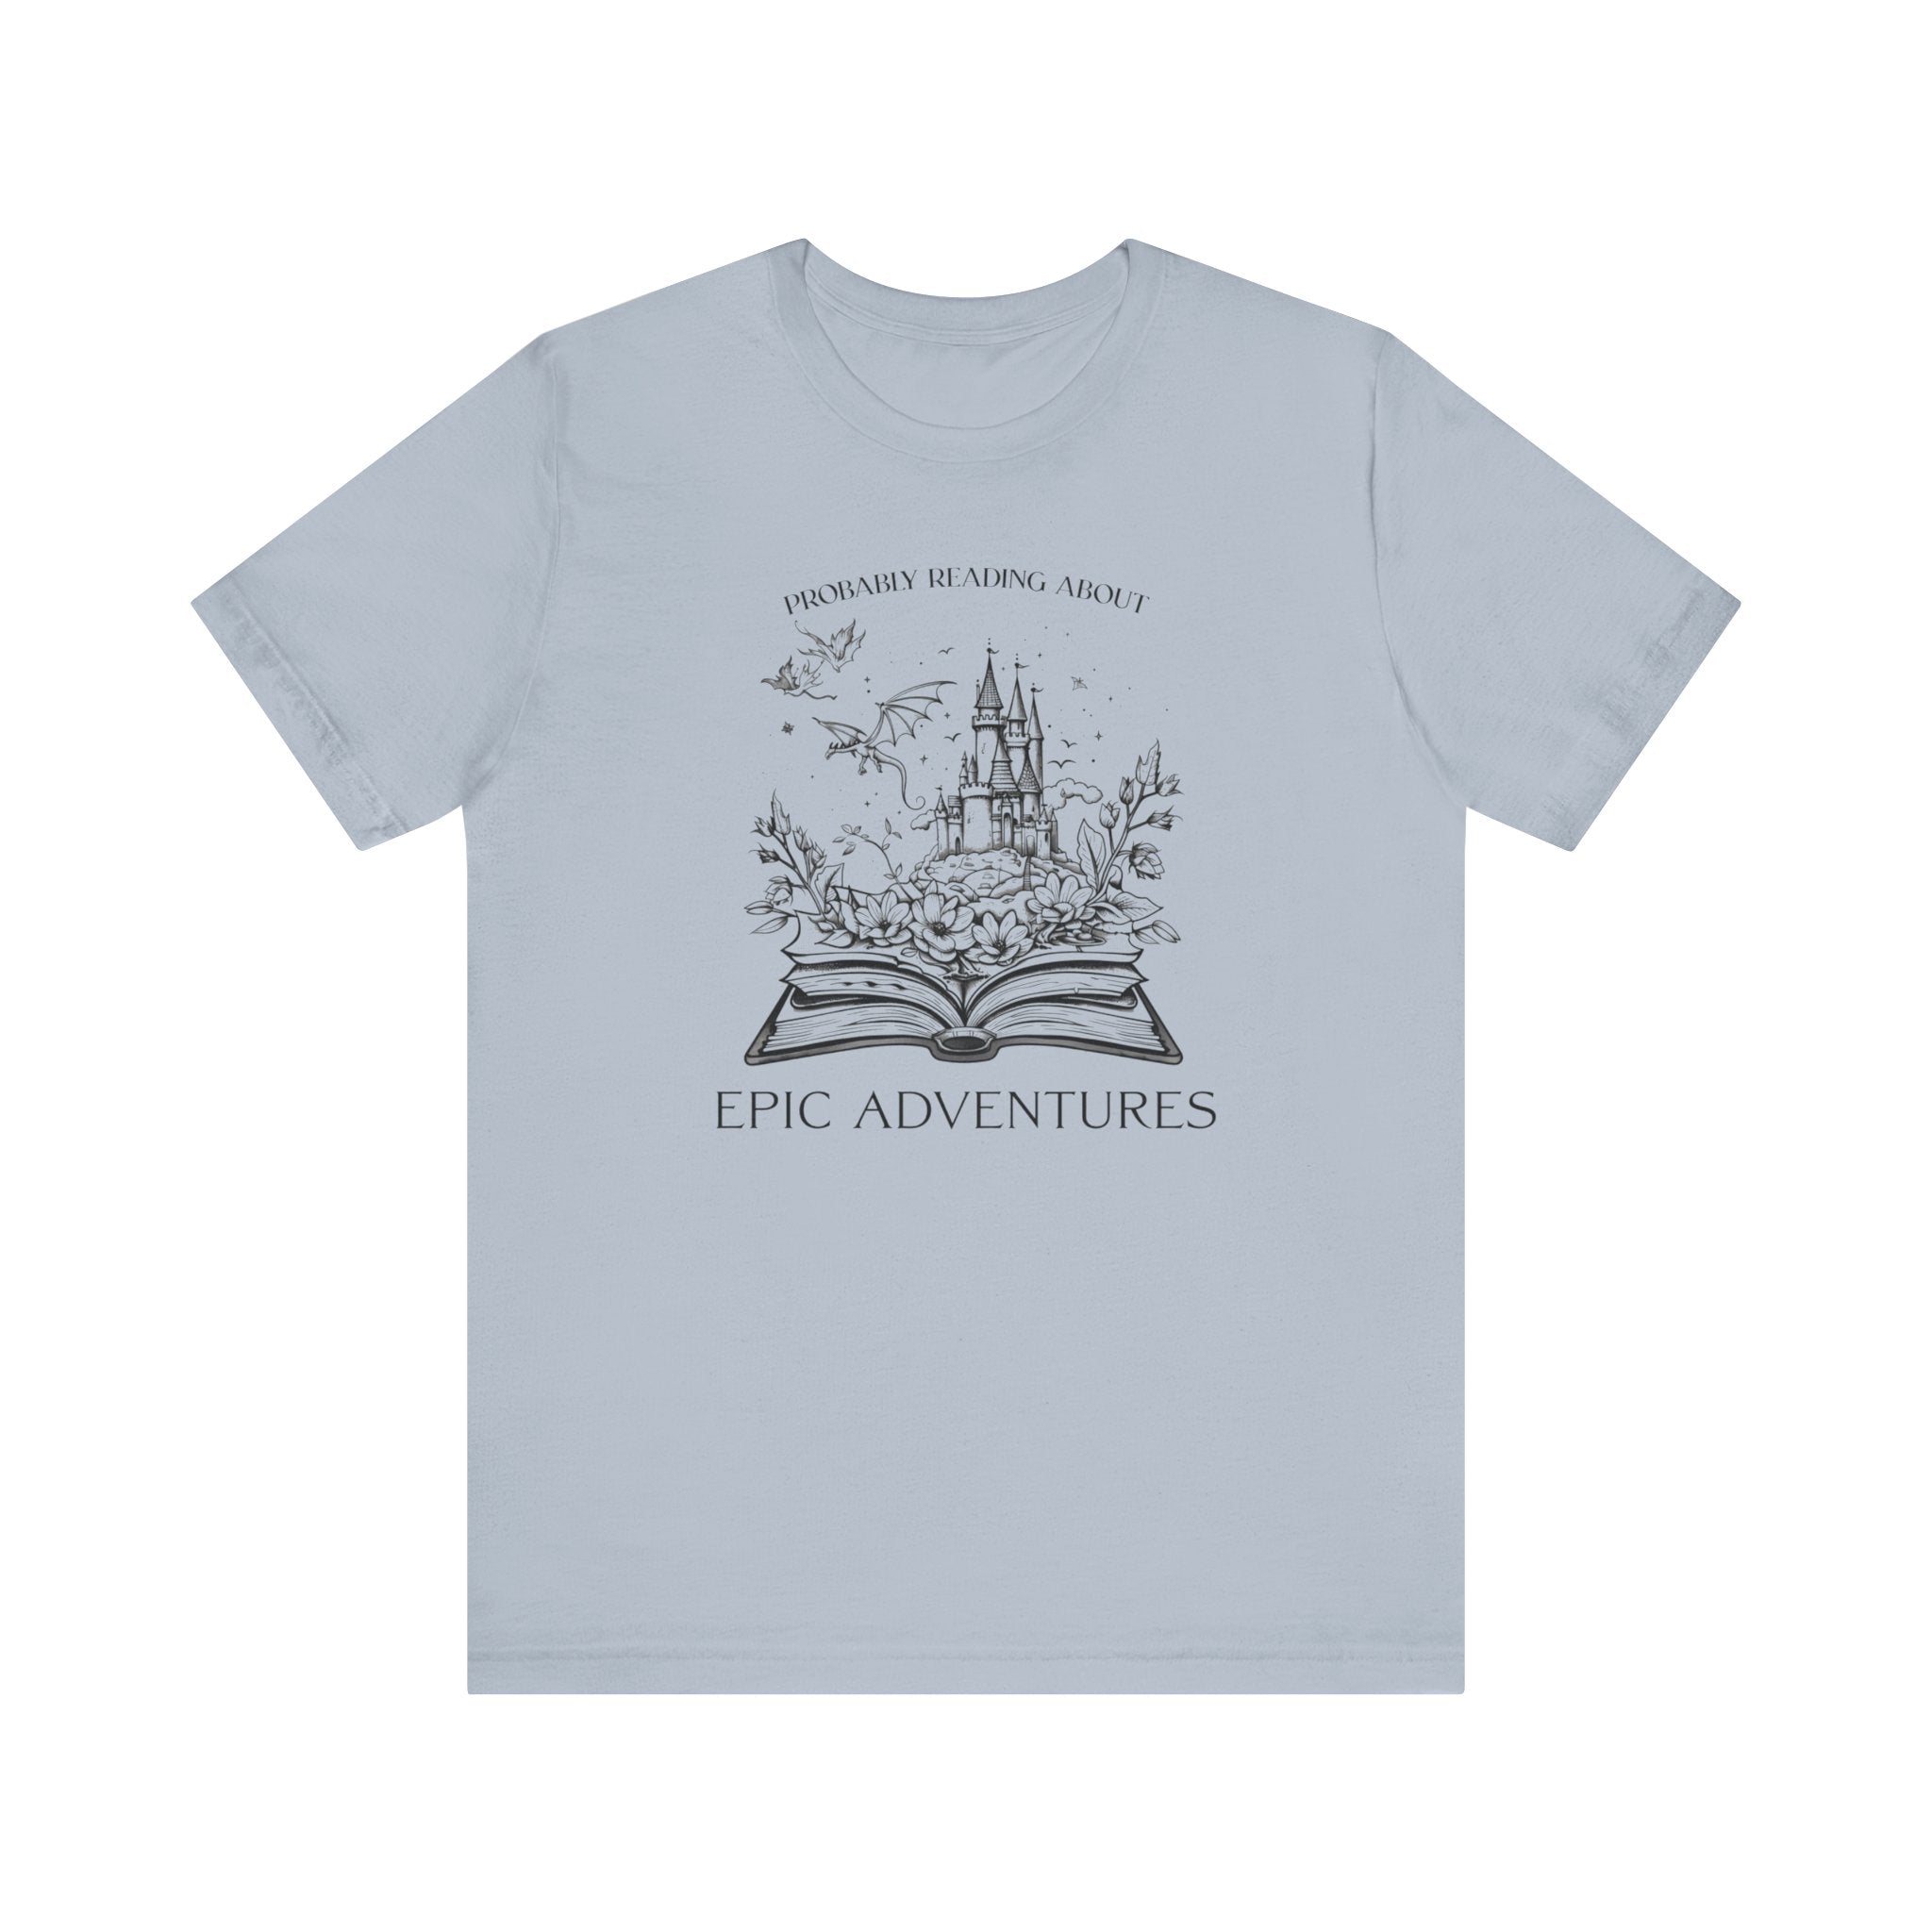 Probably Reading About Epic Adventures T-Shirt, Fantasy Shirt, Gamer Shirt, Fantasy Reader Shirt